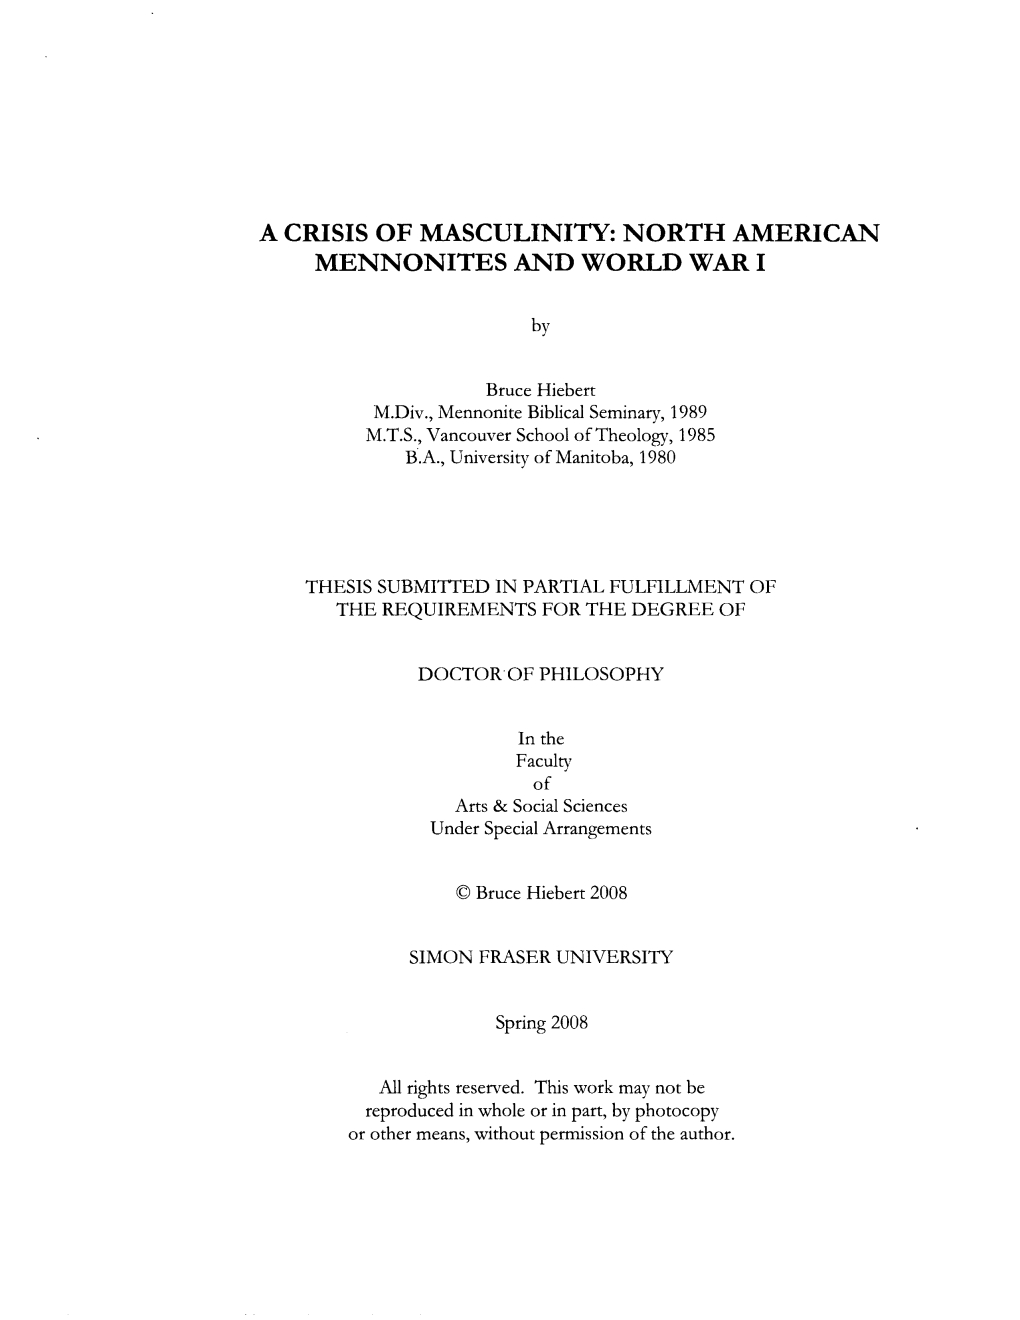 A Crisis of Masculinity: North American Mennonites and World War I